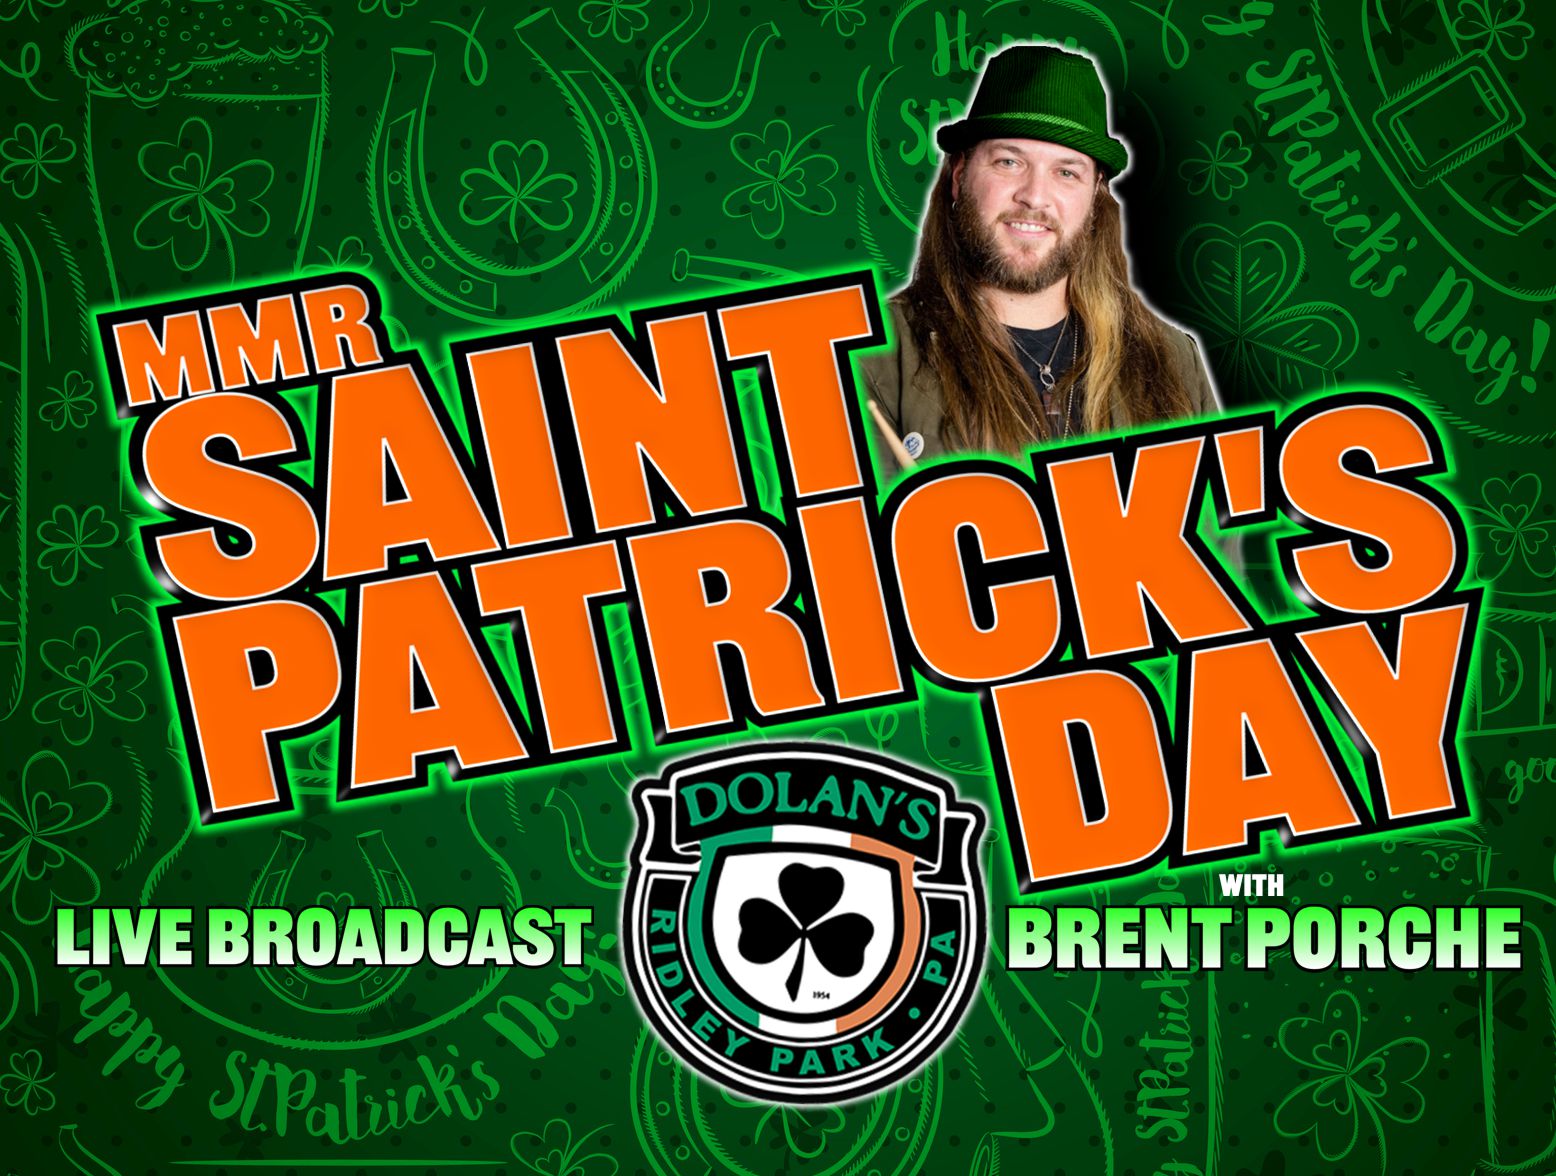 Saint Patrick's Day Broadcast with Brent Porche